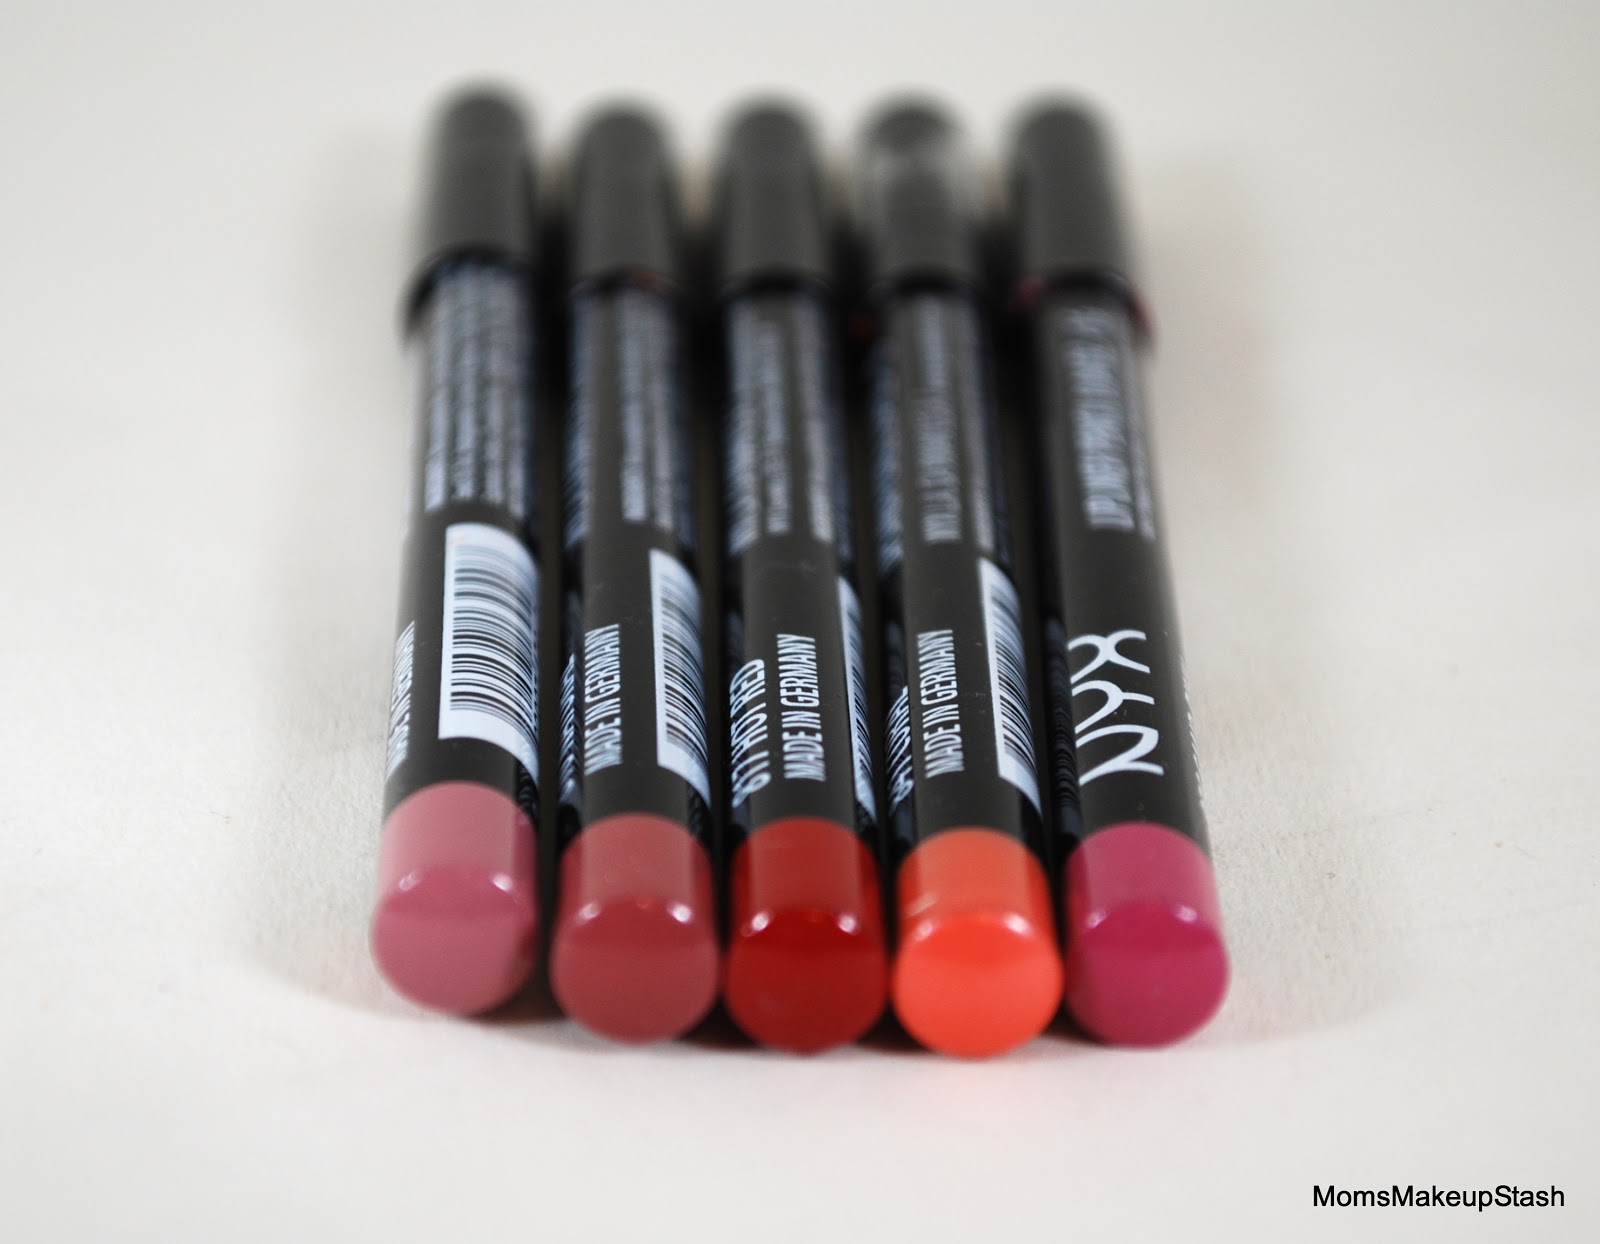 NYX Lip Pencils (L-R): Pale Pink, Natural, Hot Red, Coral & Sand Pink.